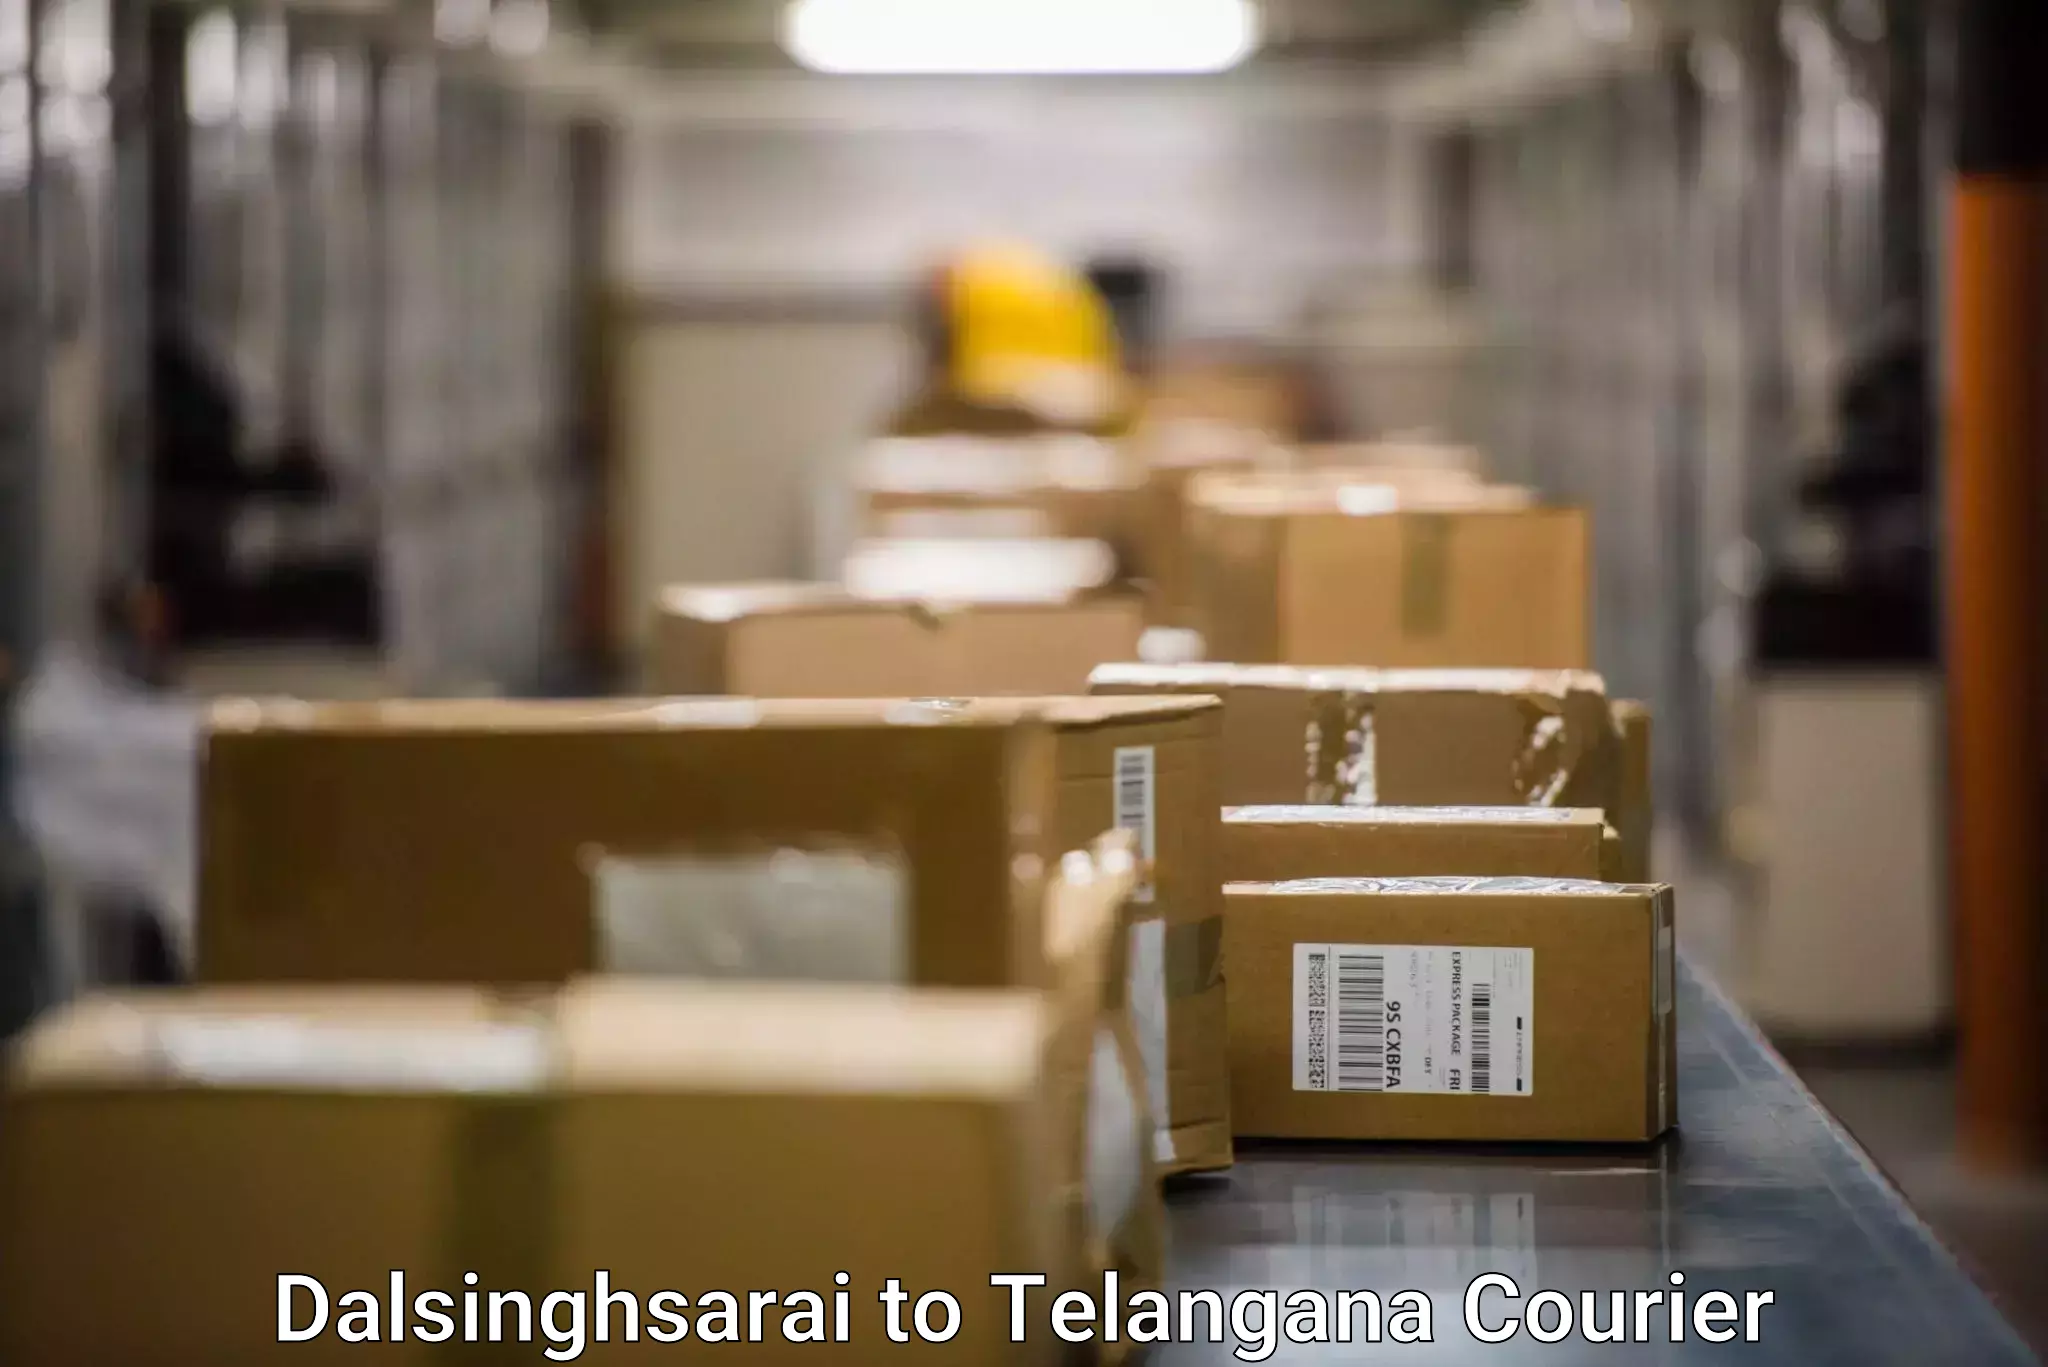 Small business couriers Dalsinghsarai to Kothagudem